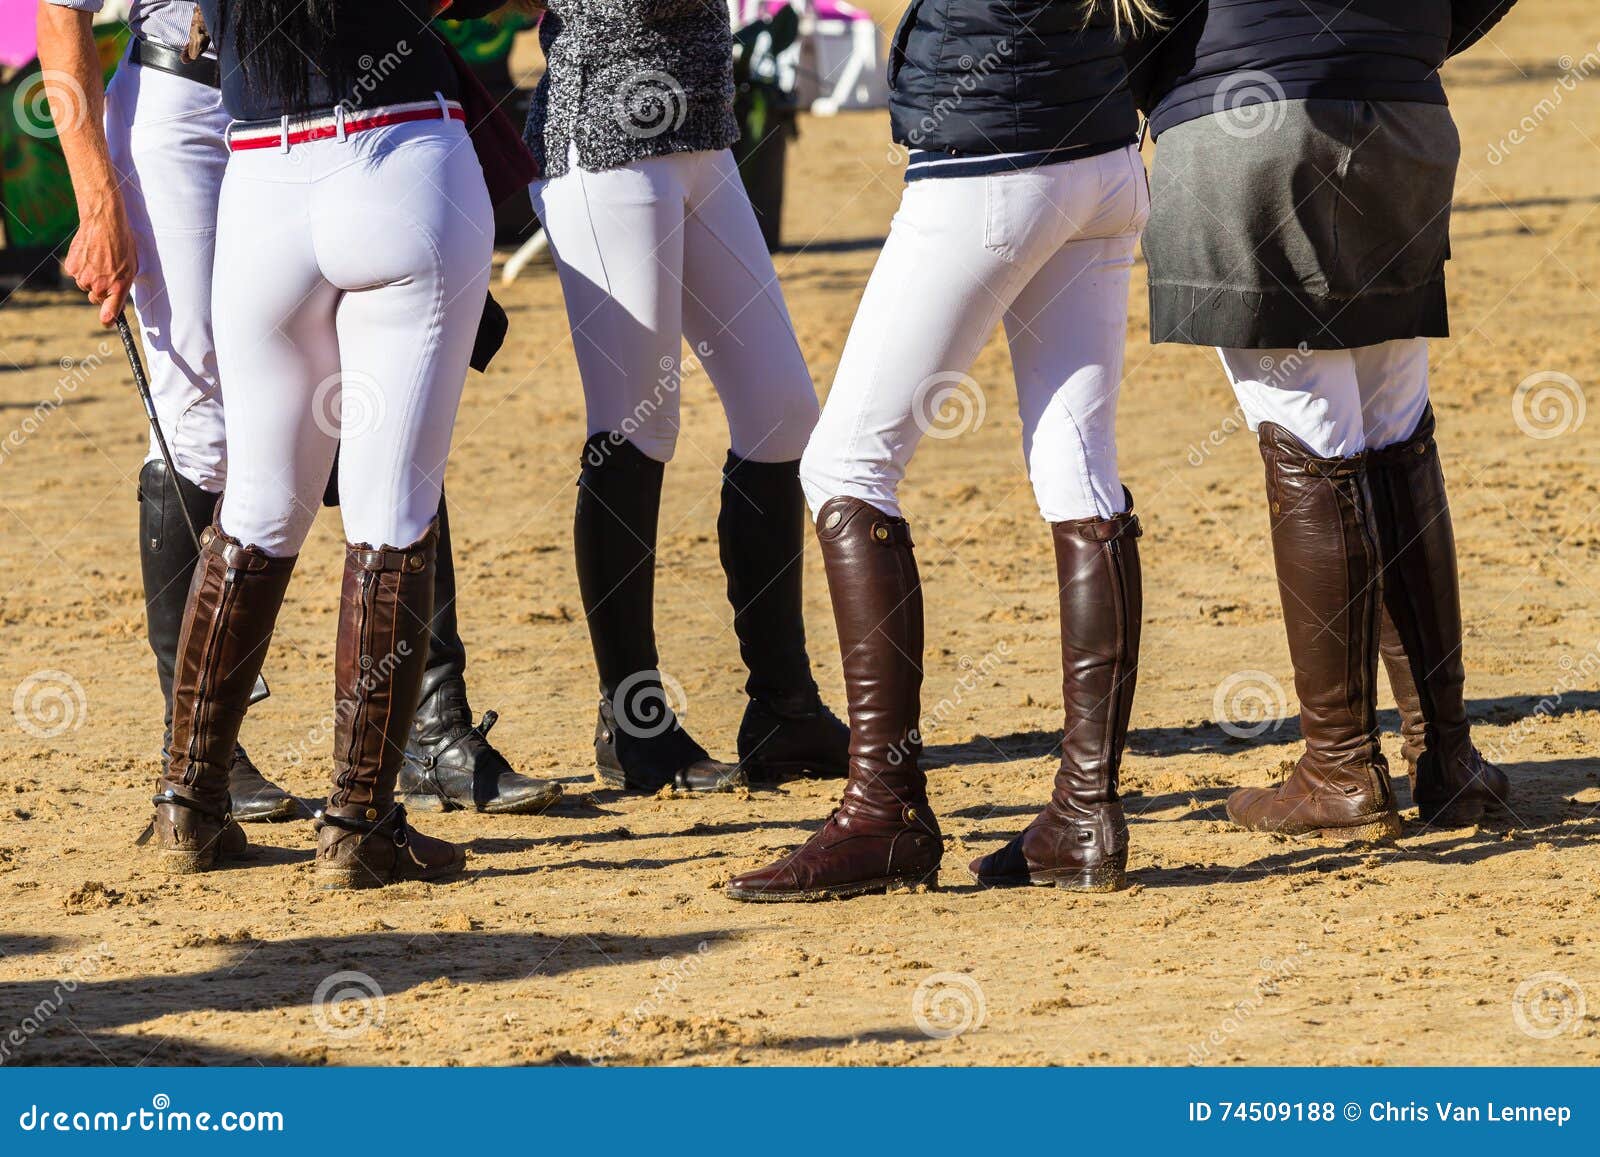 Riders Boots Equestrian stock photo. Image of boots, jumping - 74509188